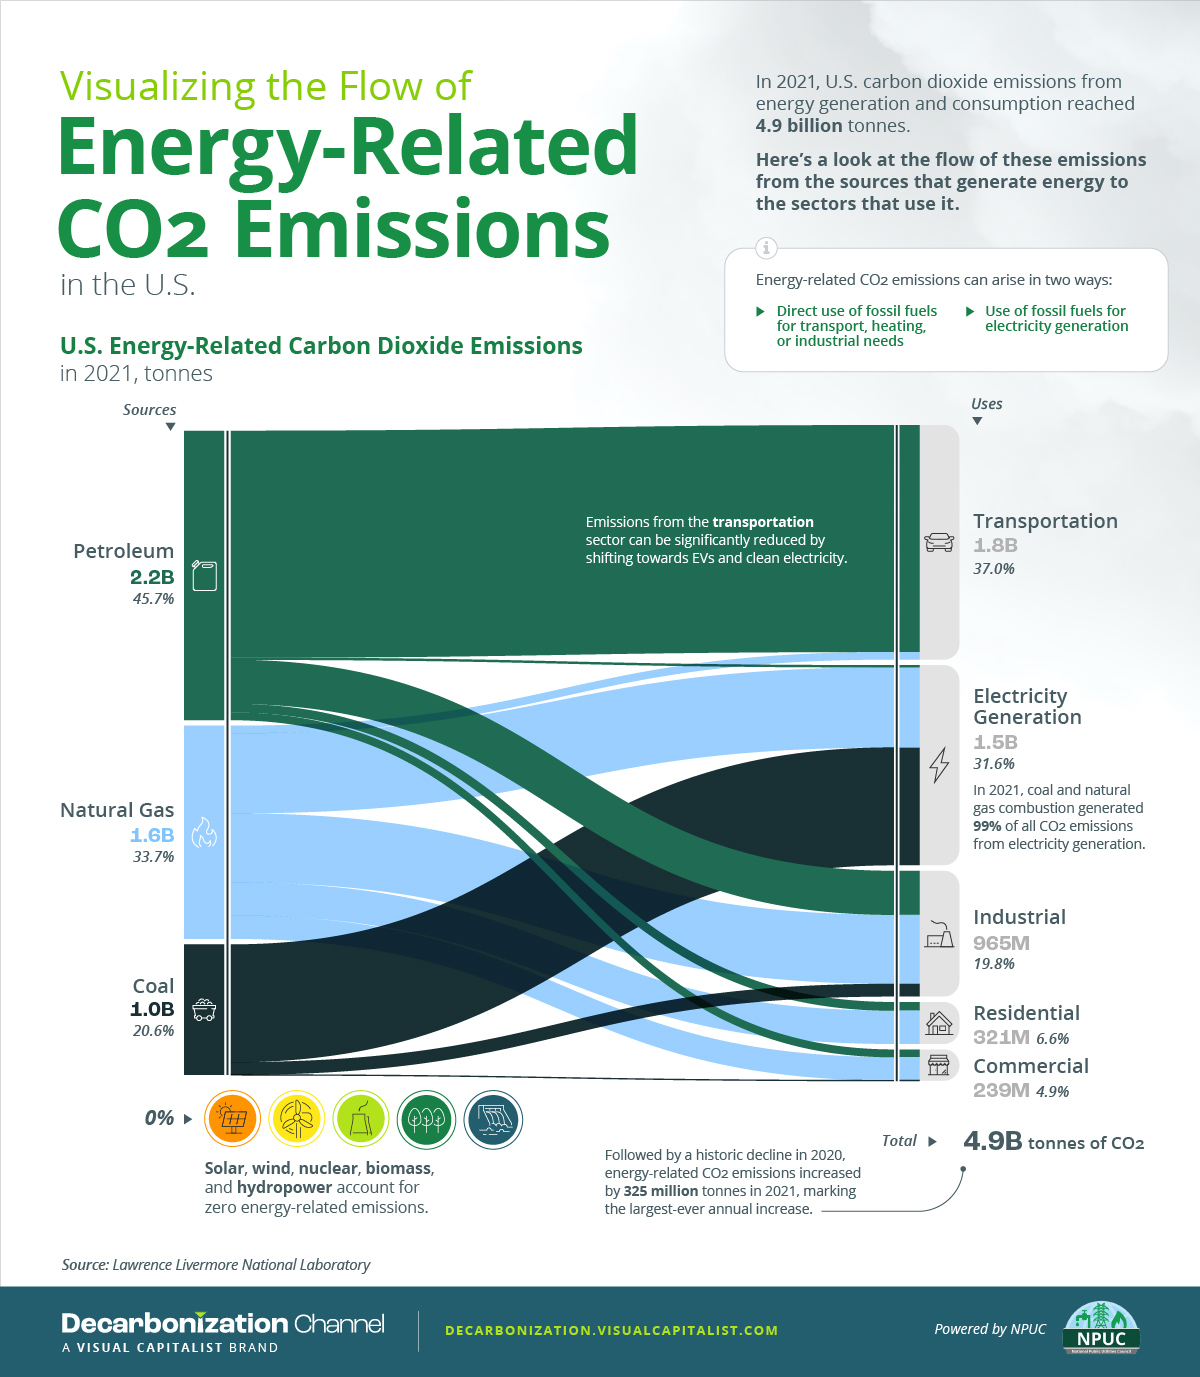 Visualizing the Flow of Energy-Related CO2 Emissions in the U.S.